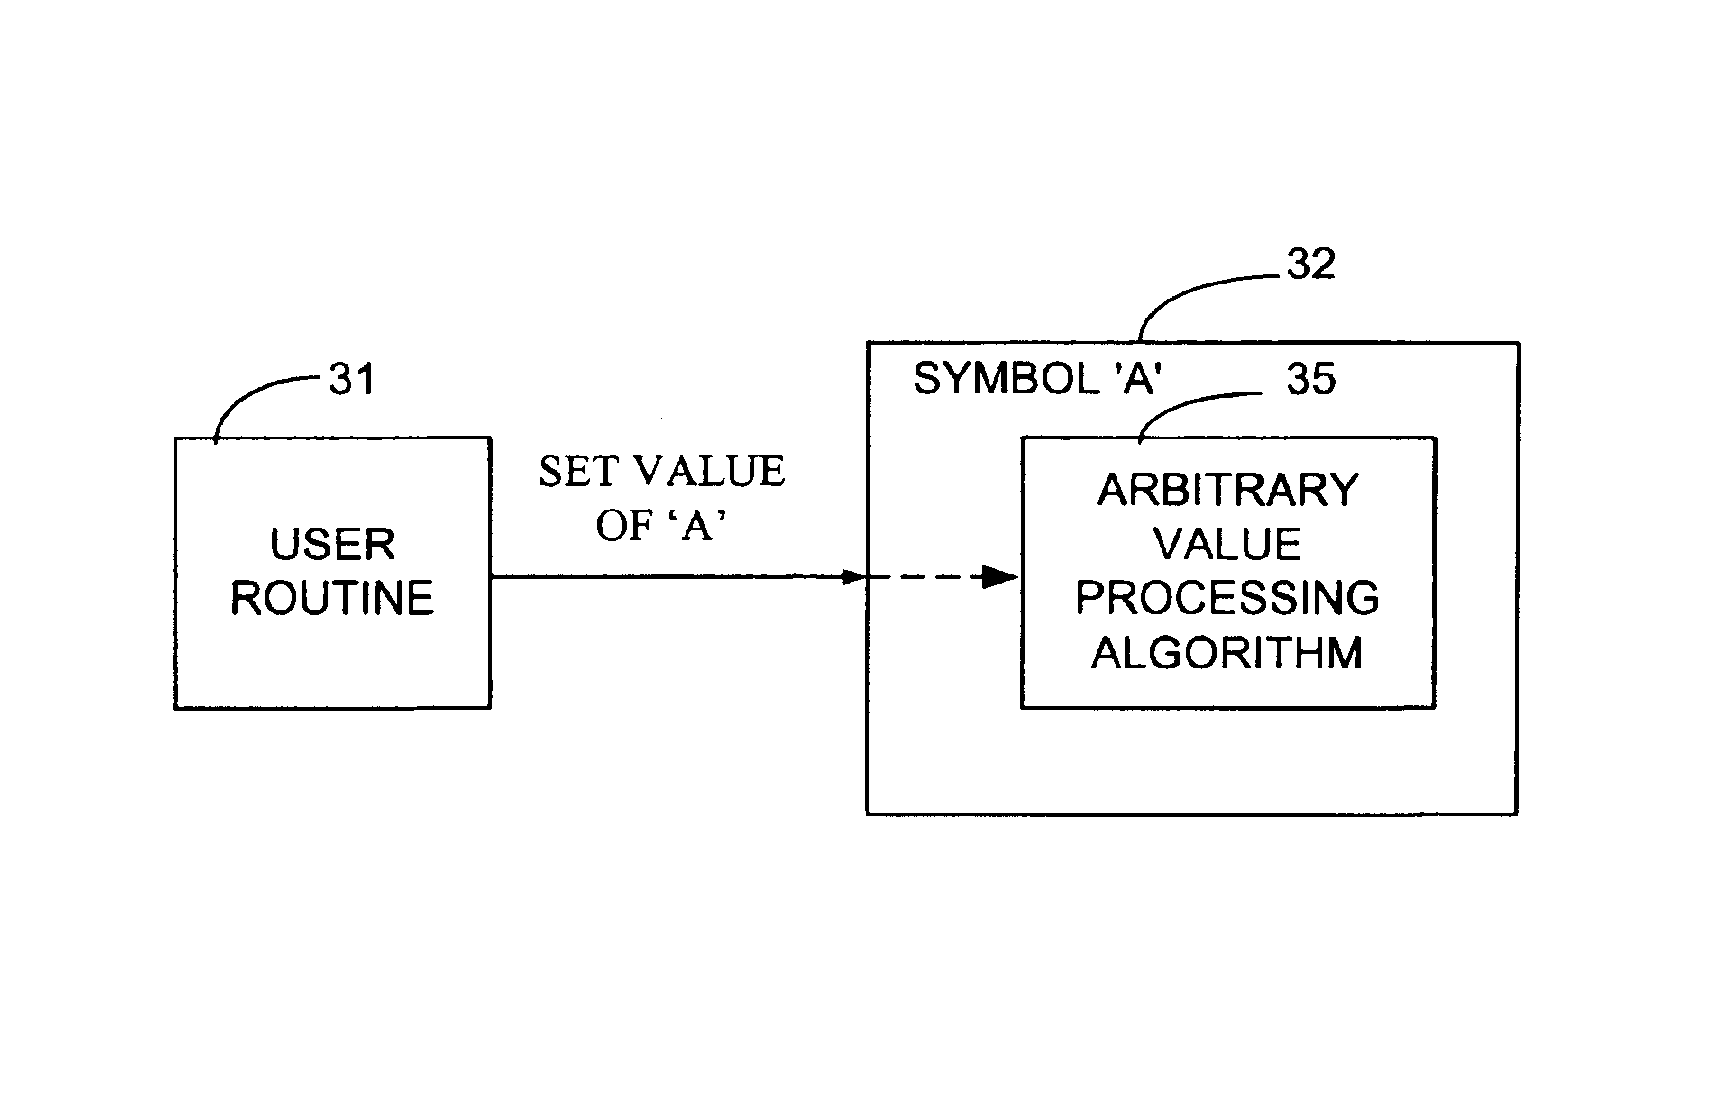 Active data type variable for use in software routines that facilitates customization of software routines and efficient triggering of variable processing